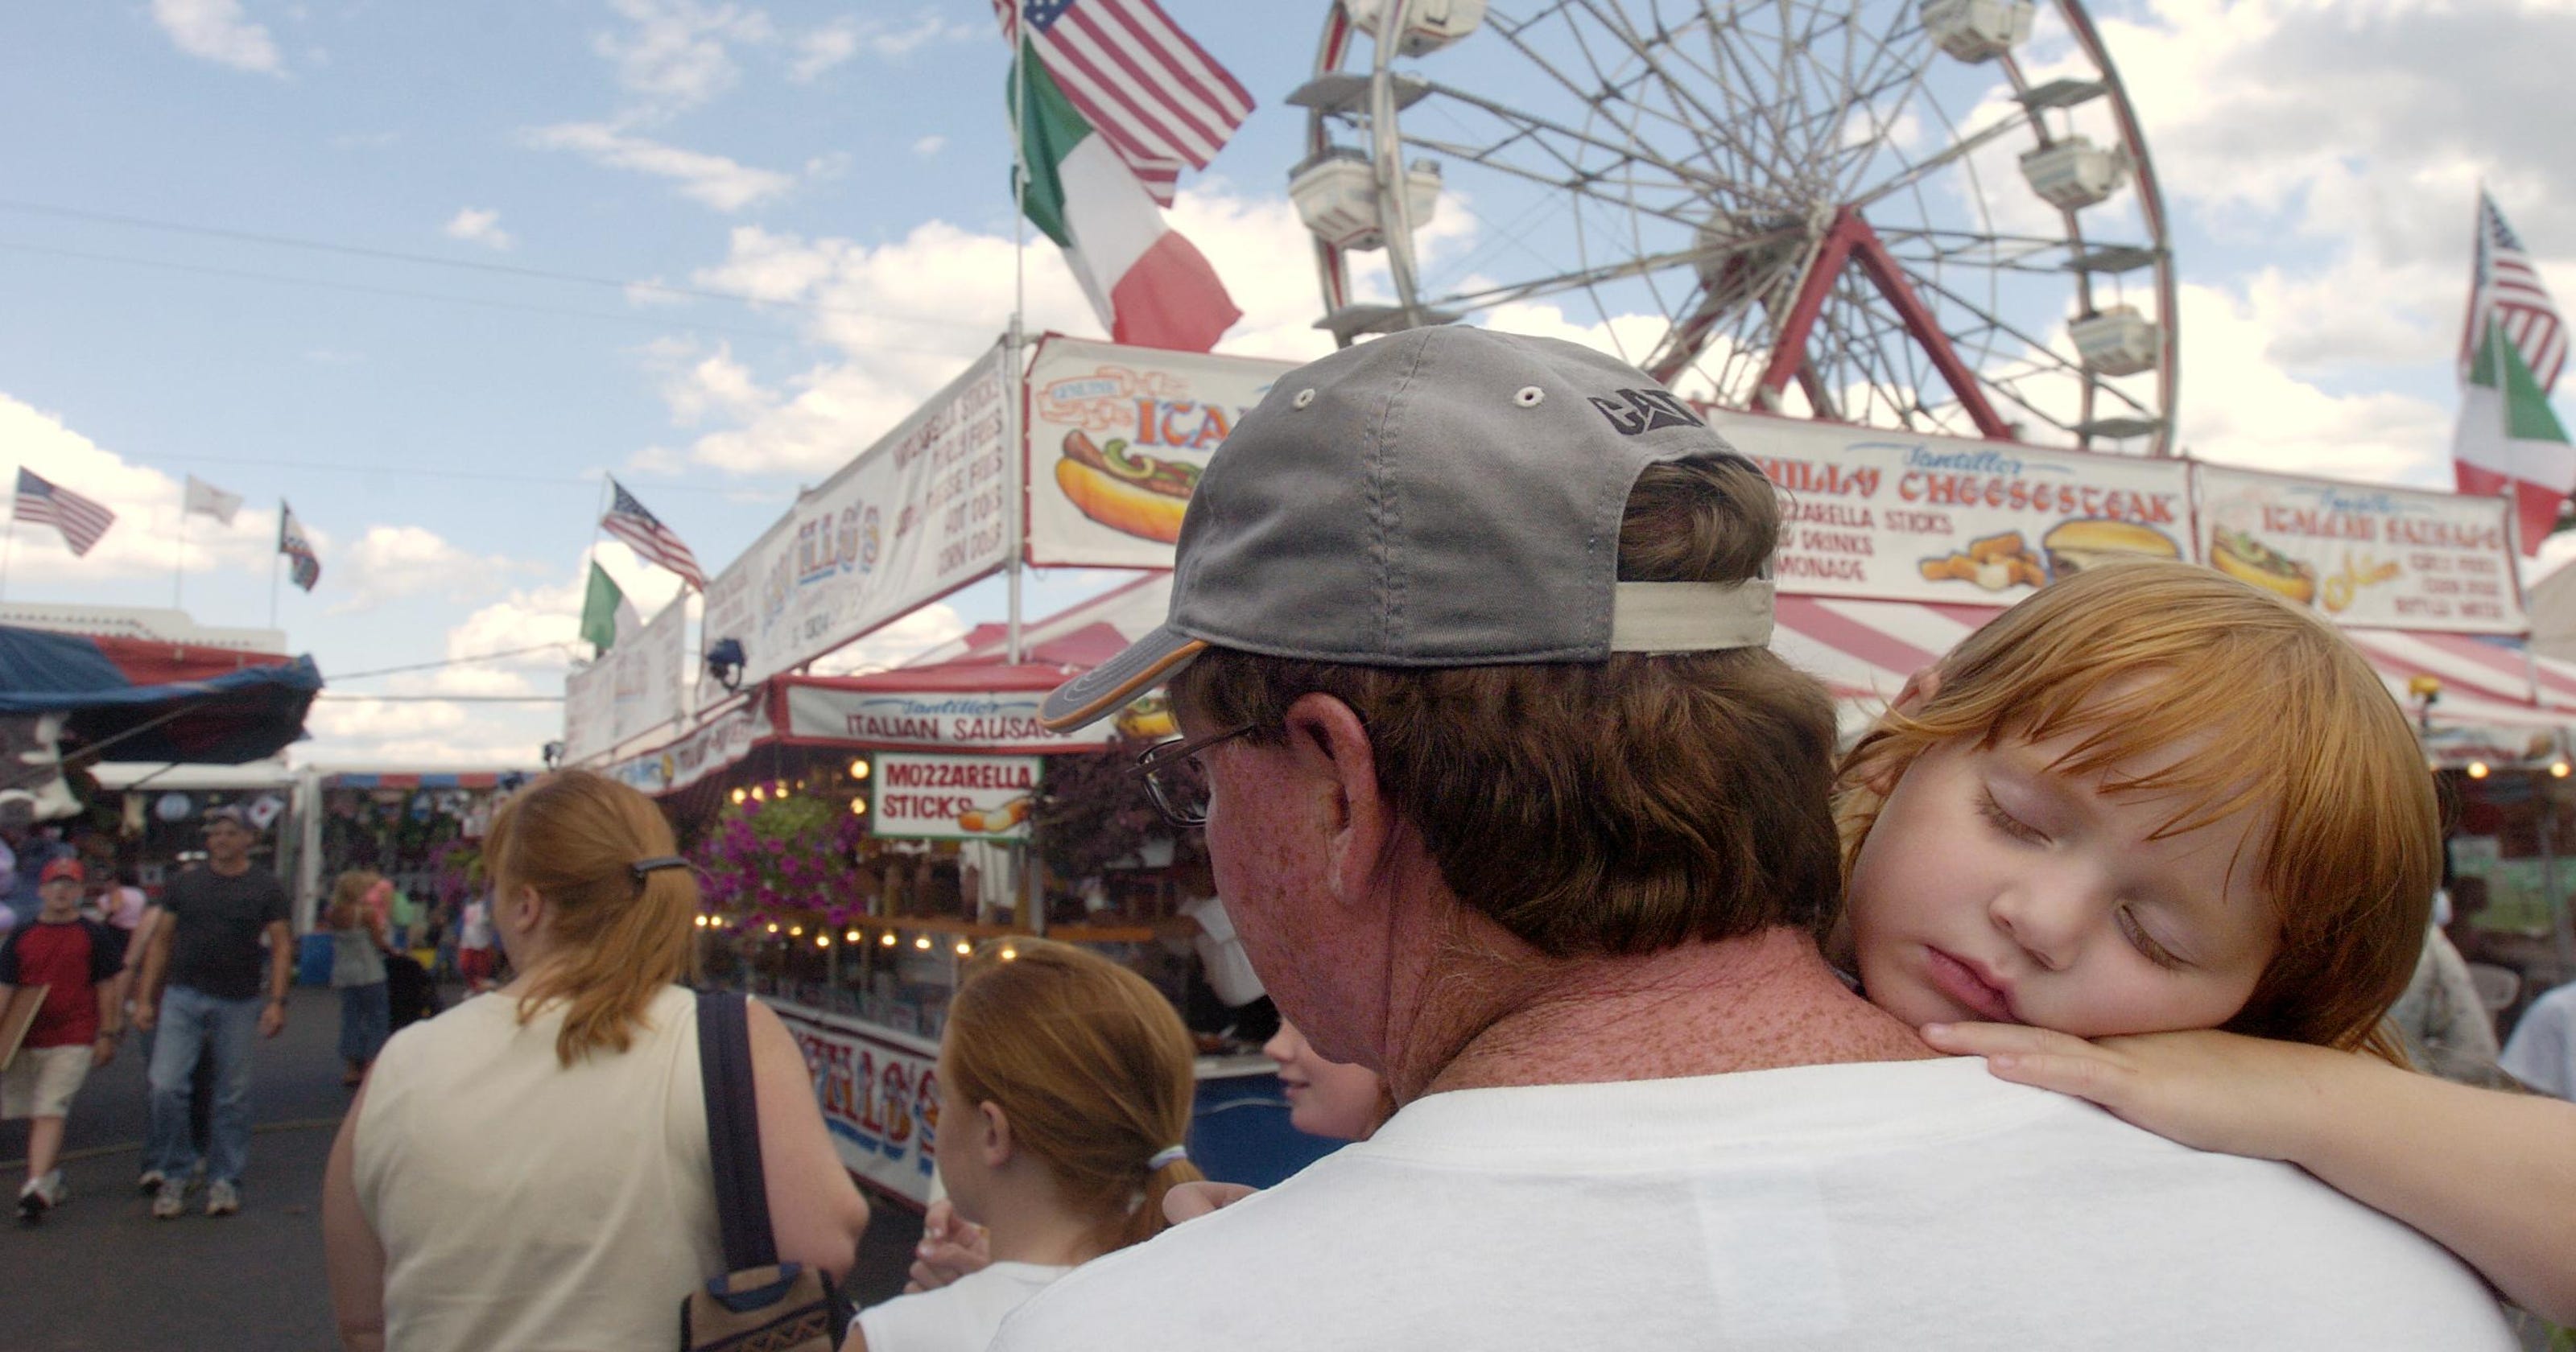 Harford Fair returns to Pa. for 160th year